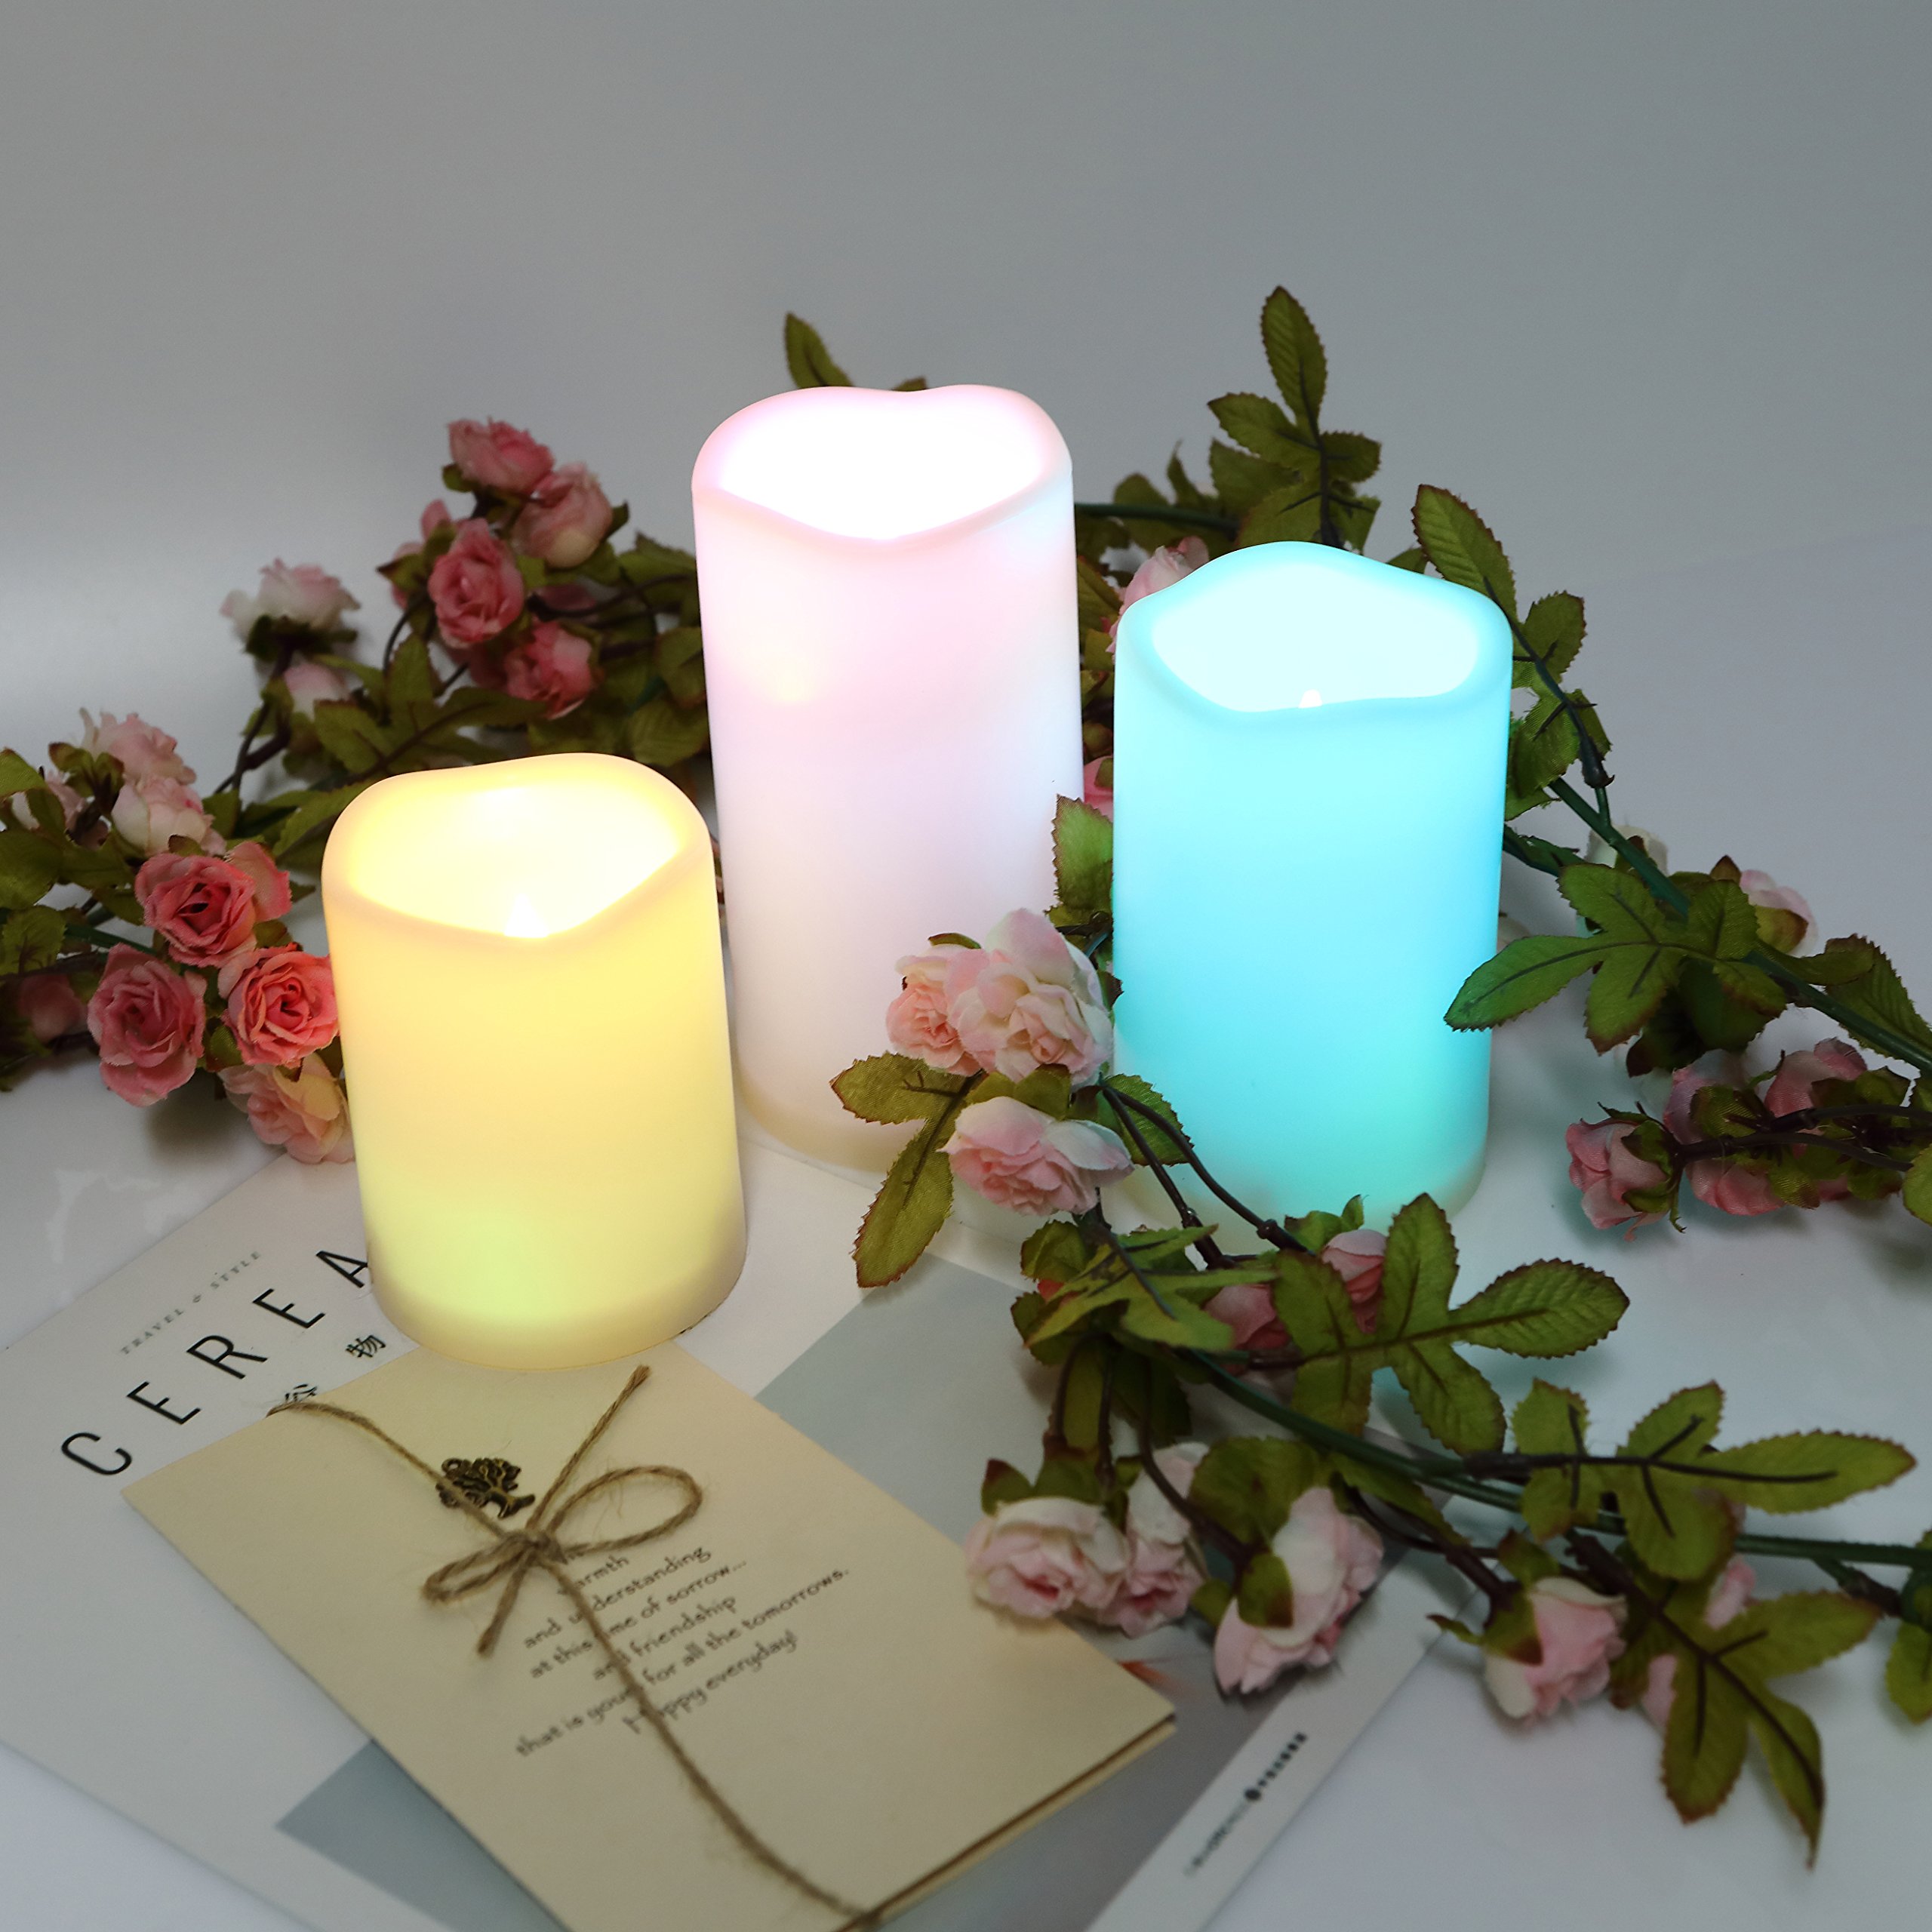 Color Changing Outdoor Flameless Pillar Candles Remote Waterproof Battery Operated Electric LED Candle Set for Gift Home Party Wedding Supplies Garden Halloween Christmas Decoration, 2 Pack, 3” x 4”